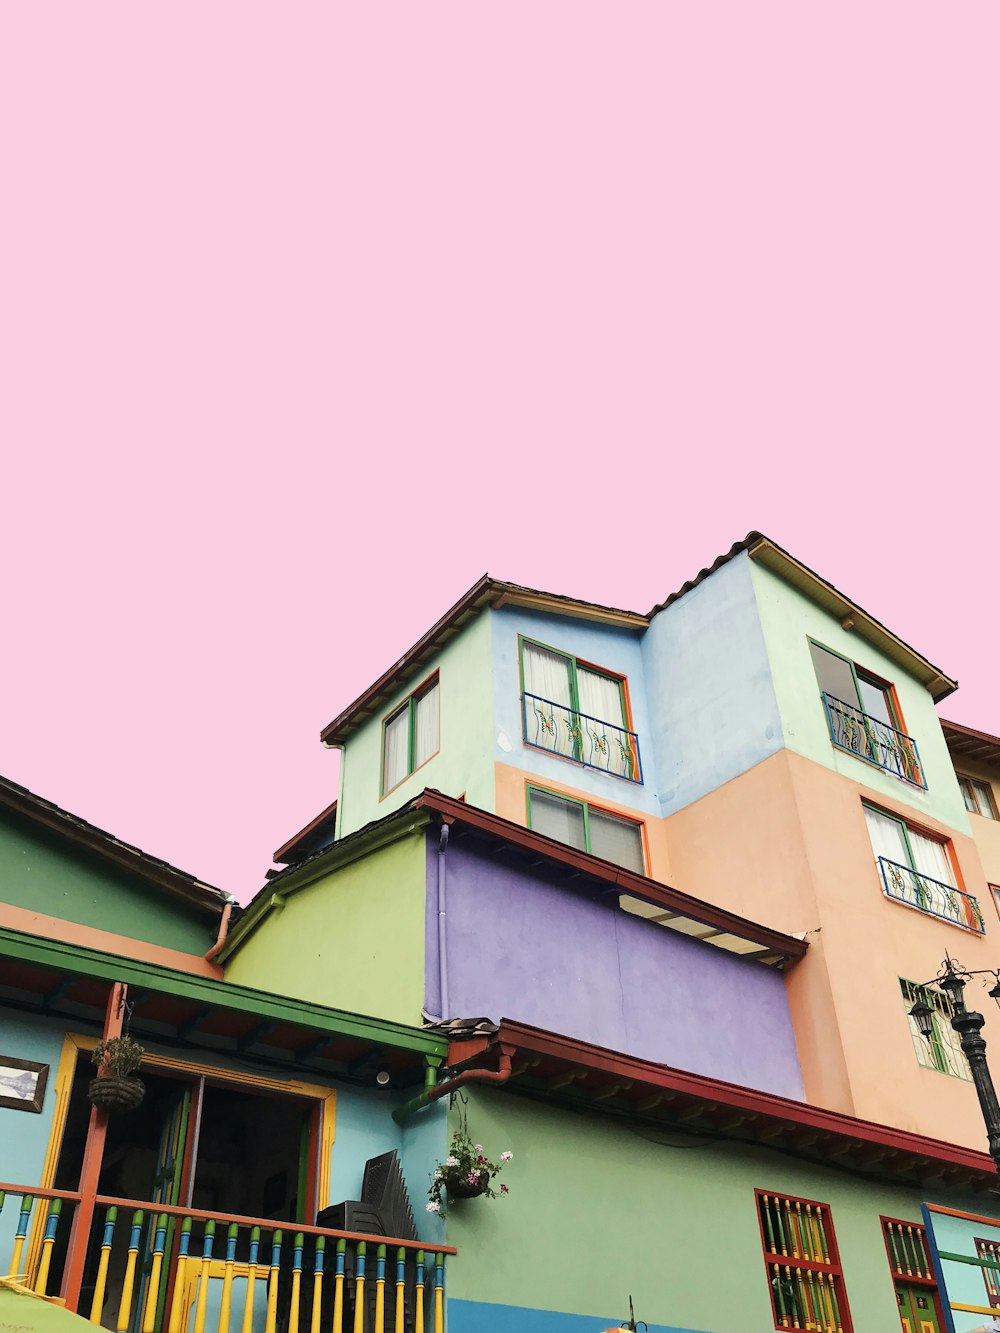 multicolored house under pink sky